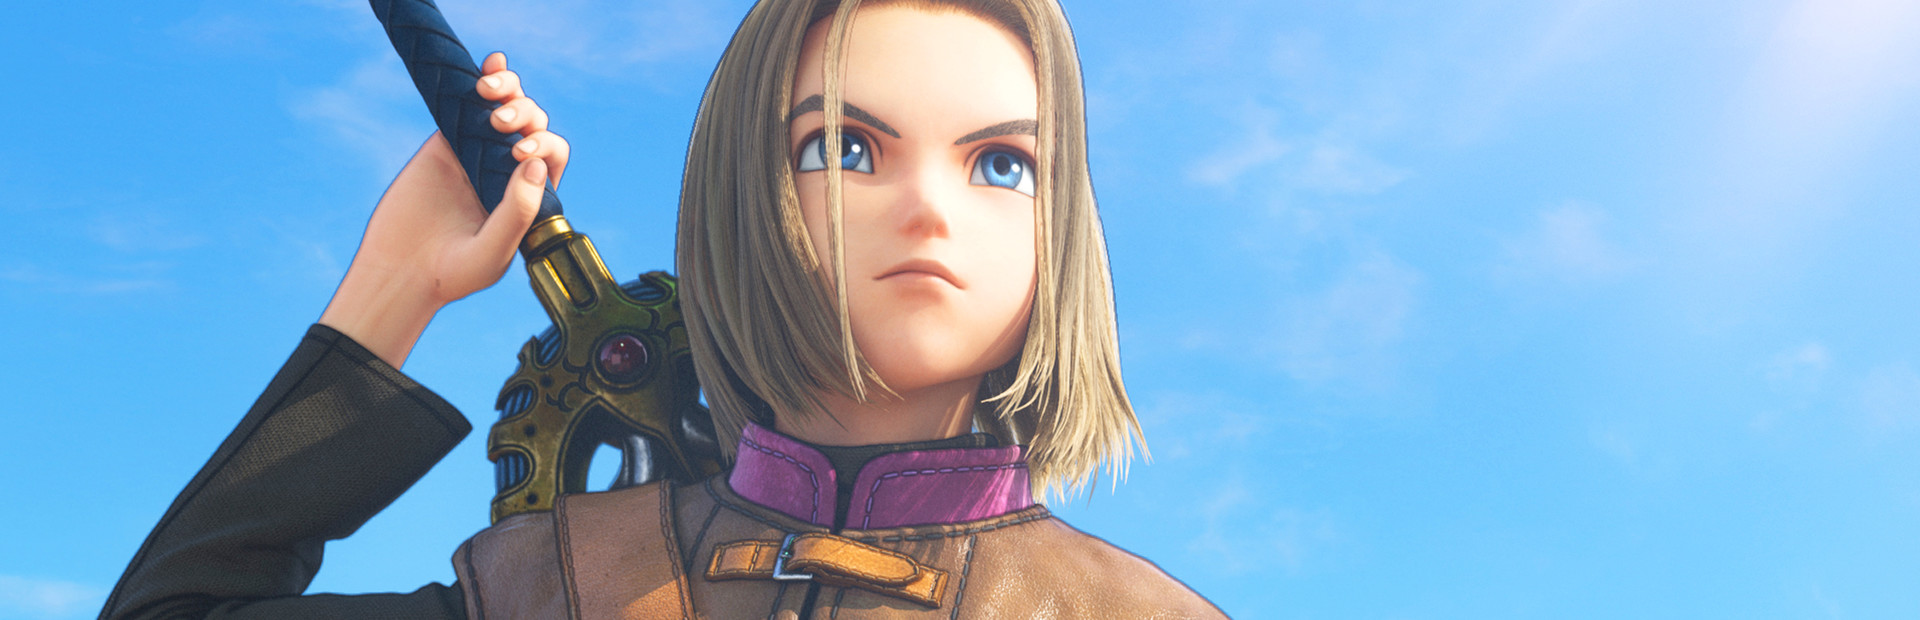 DRAGON QUEST® XI S: Echoes of an Elusive Age™ - Definitive Edition cover image